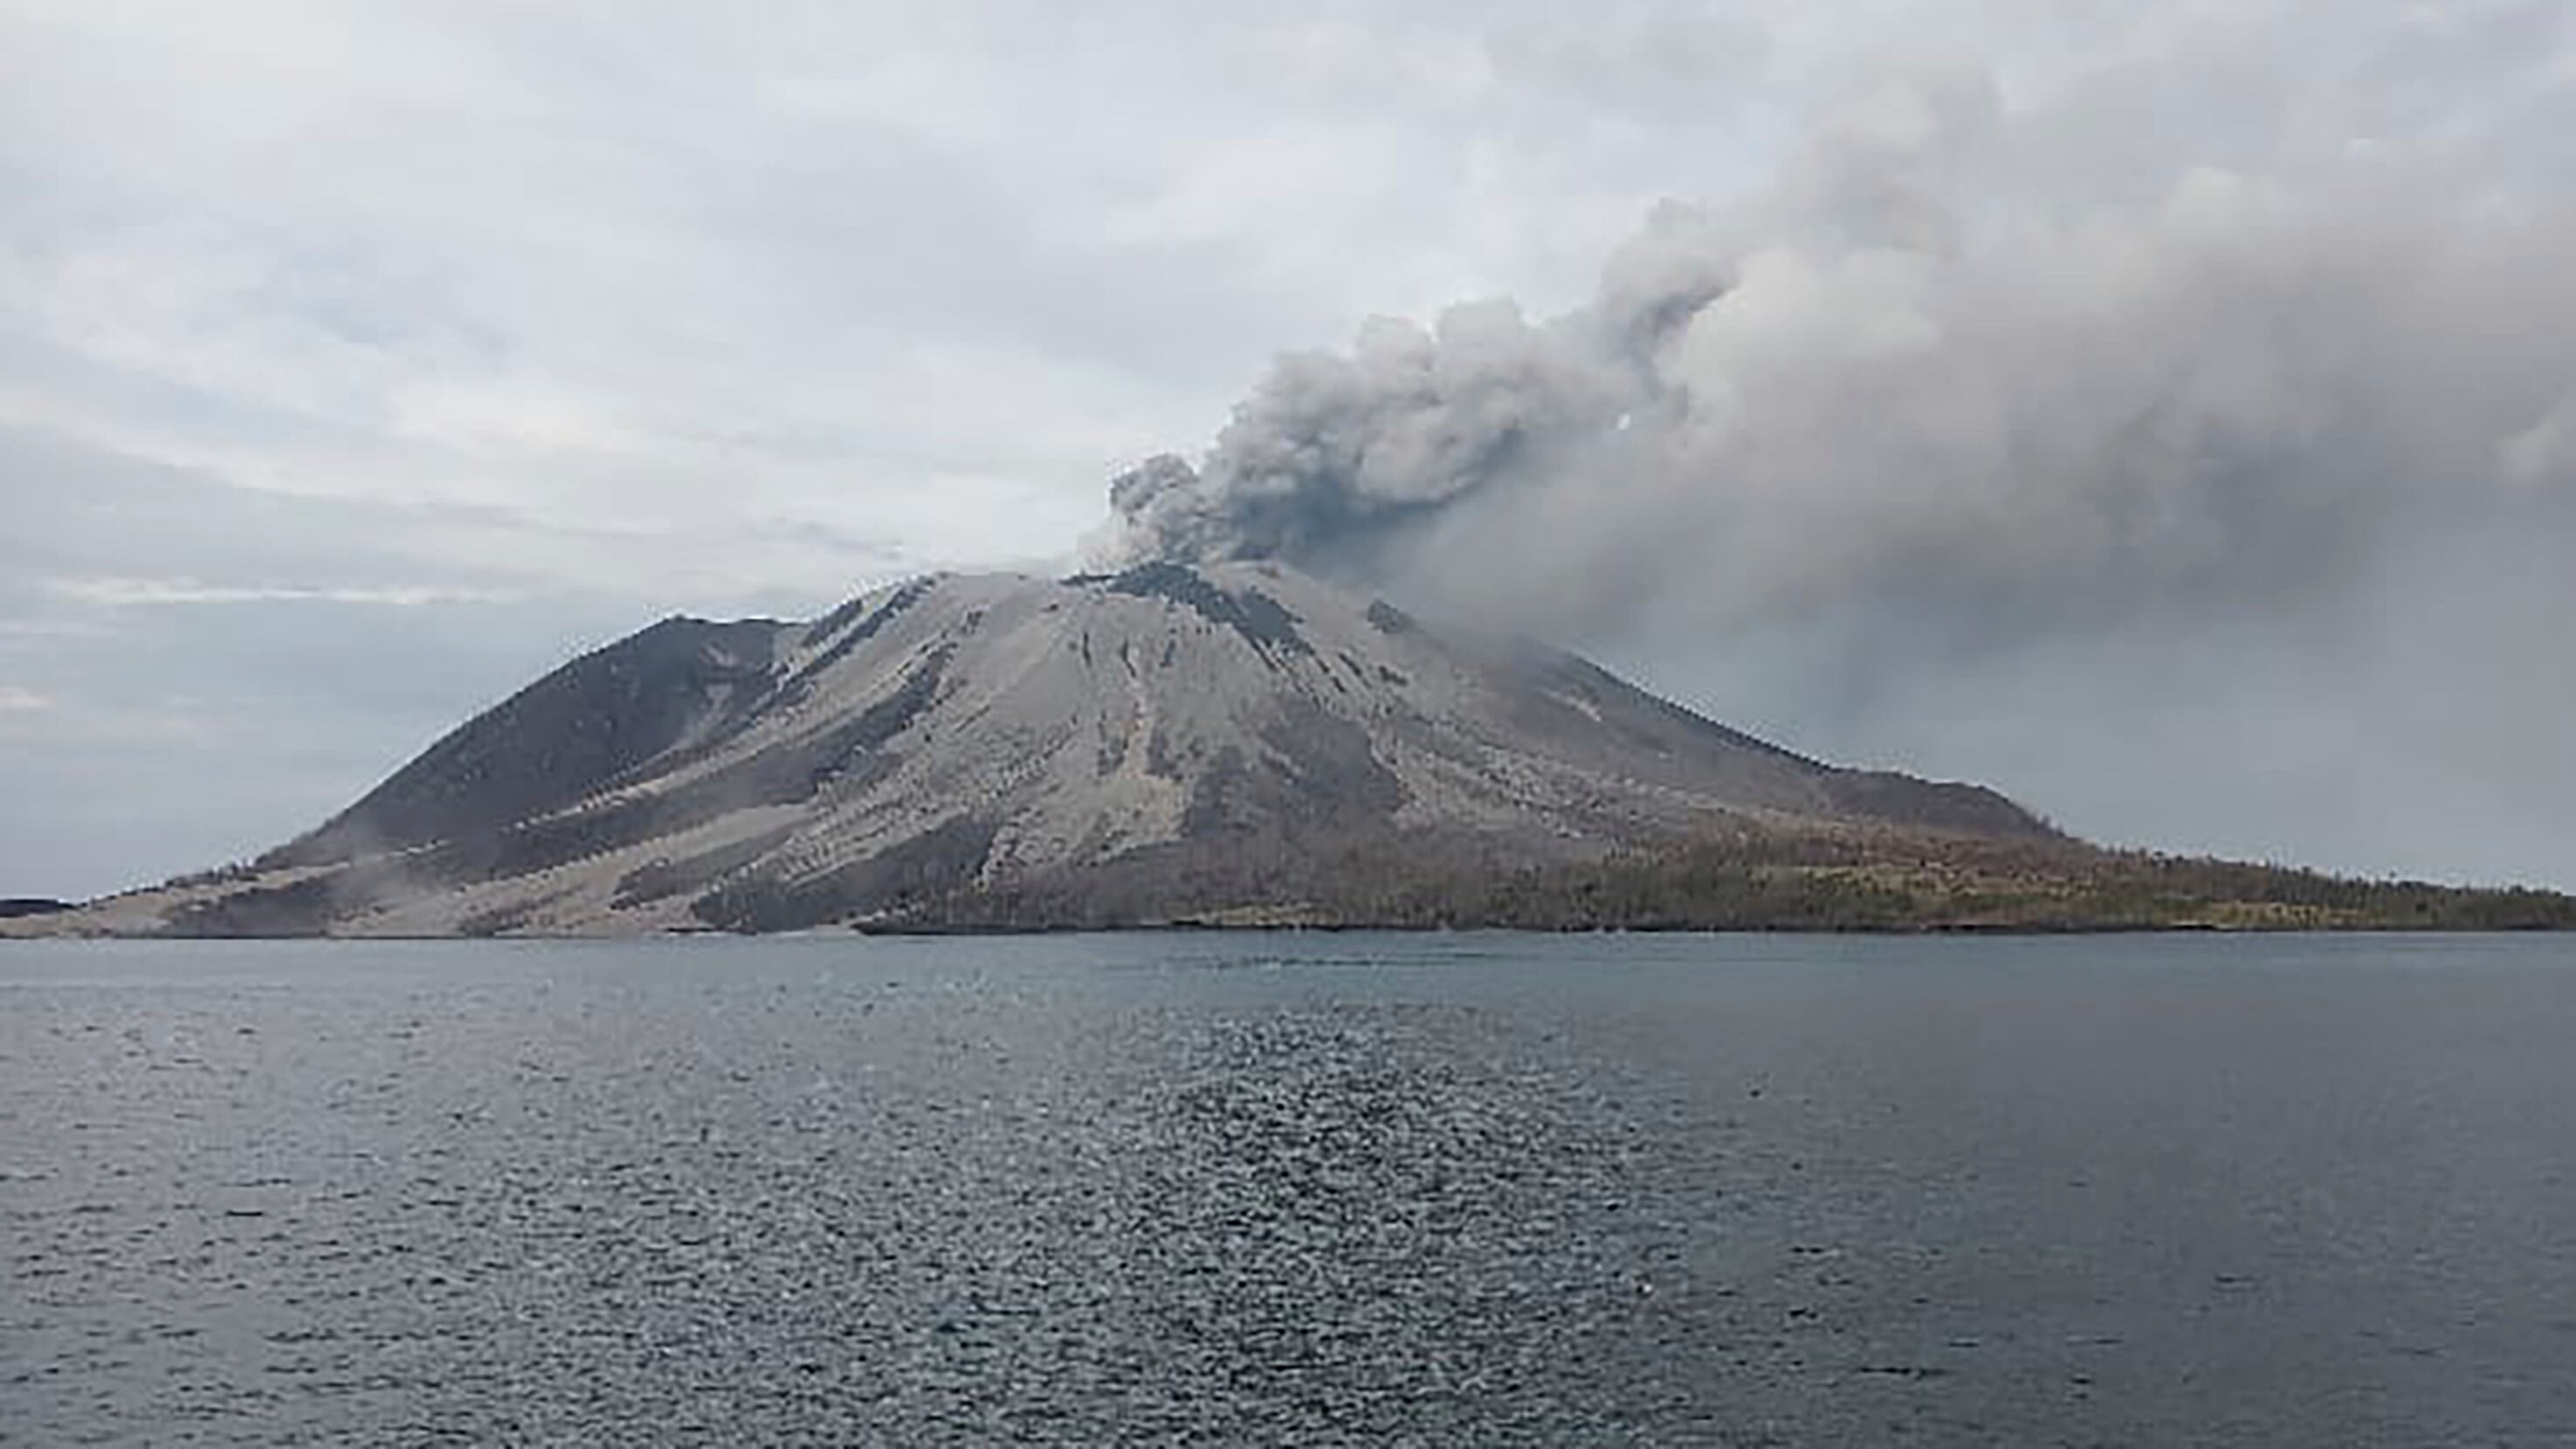 Indonesia’s Mount Ruang volcano spewed more hot clouds on Wednesday after an eruption the previous day forced the closure of schools and airports (Hendra Ambalao/AP)